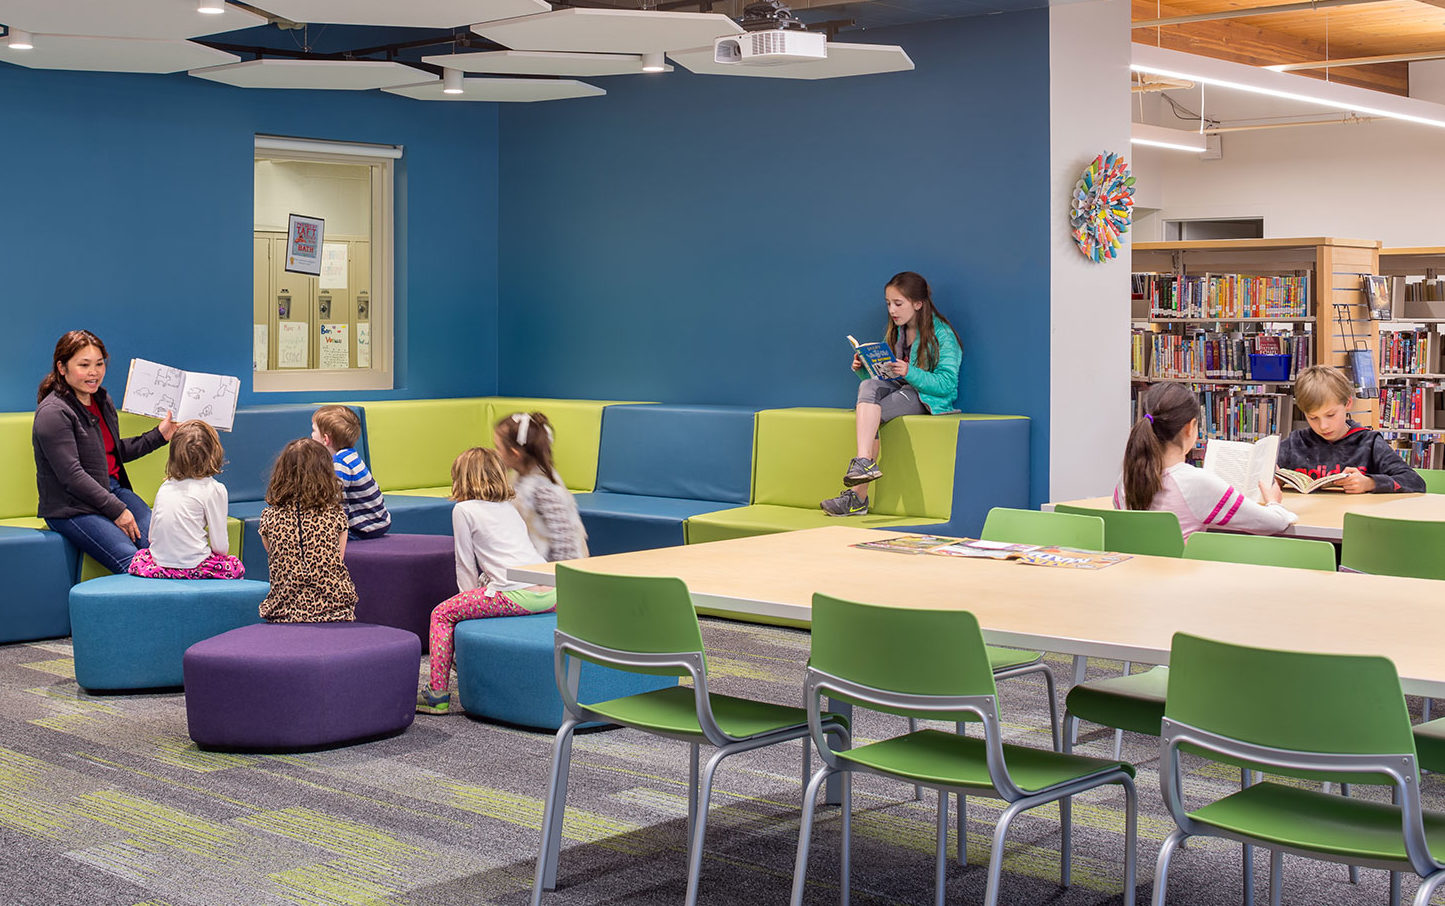 Portland Jewish Academy Learning Commons. Children sit in brightly-colored storytime area while a teach reads aloud to them. Blue walls surround the space and hexagon acoustic baffles hang from ceiling. Long reaing tables are featured in the foreground and book shelves in the background.